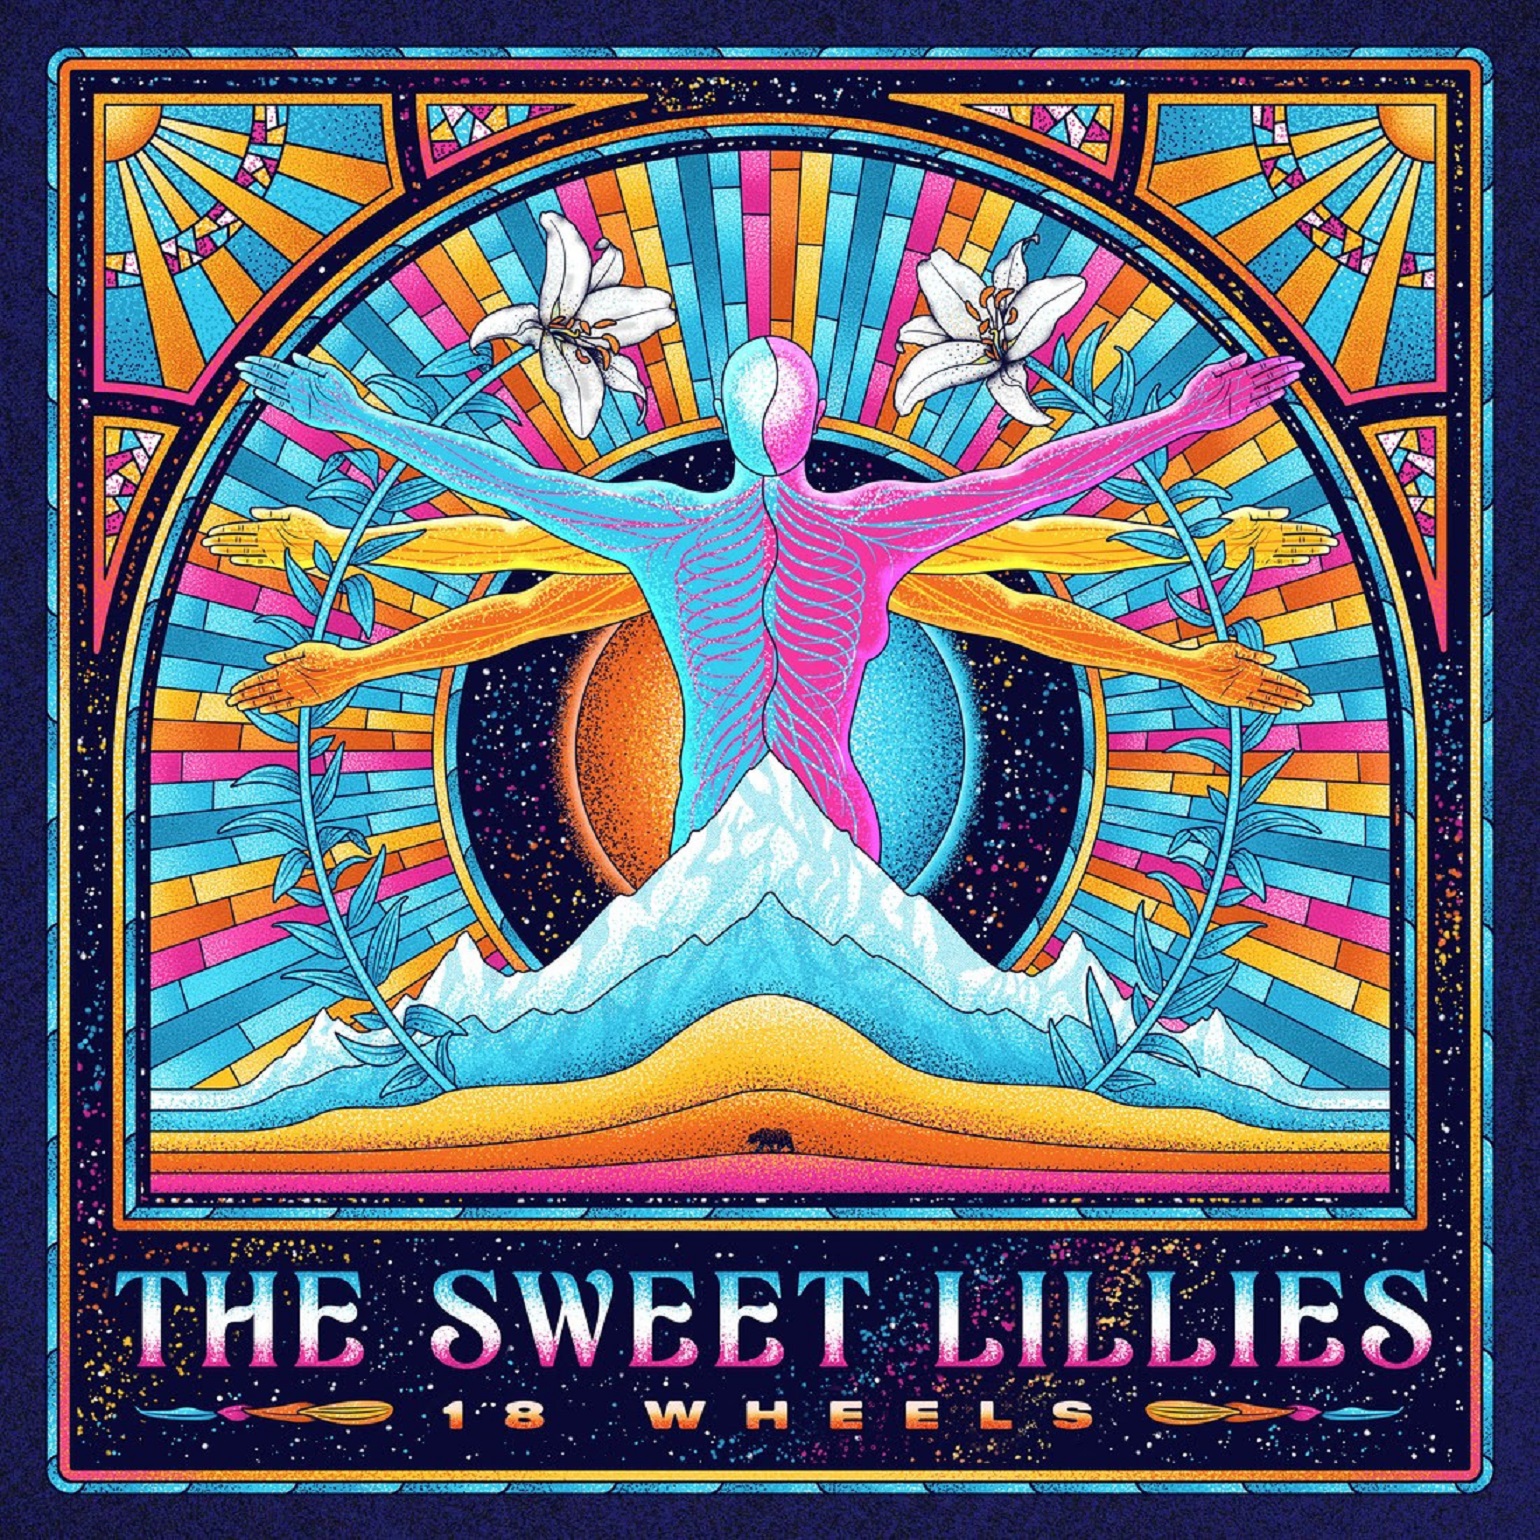 The Sweet Lillies   Release "18 Wheels" the Second Single off Forthcoming Album Equality